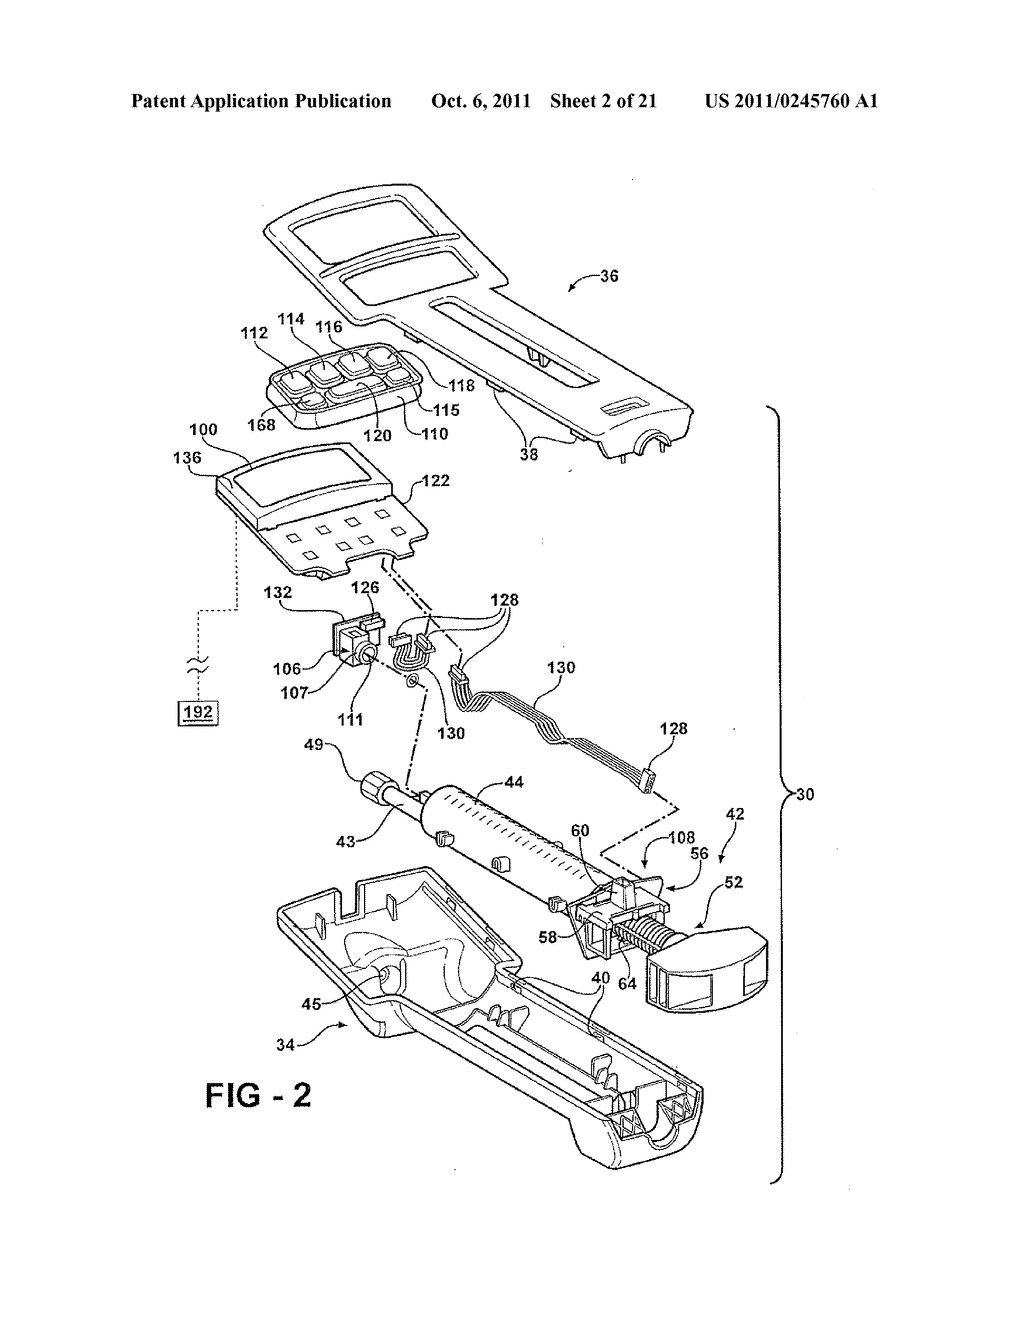 SYSTEM FOR USE DURING DISCOGRAPHY TO WIRELESSLY TRANSMIT DATA FROM     HAND-HELD FLUID DELIVERY DEVICE INSIDE STERILE FIELD TO DEVICE OUTSIDE     STERILE FIELD - diagram, schematic, and image 03